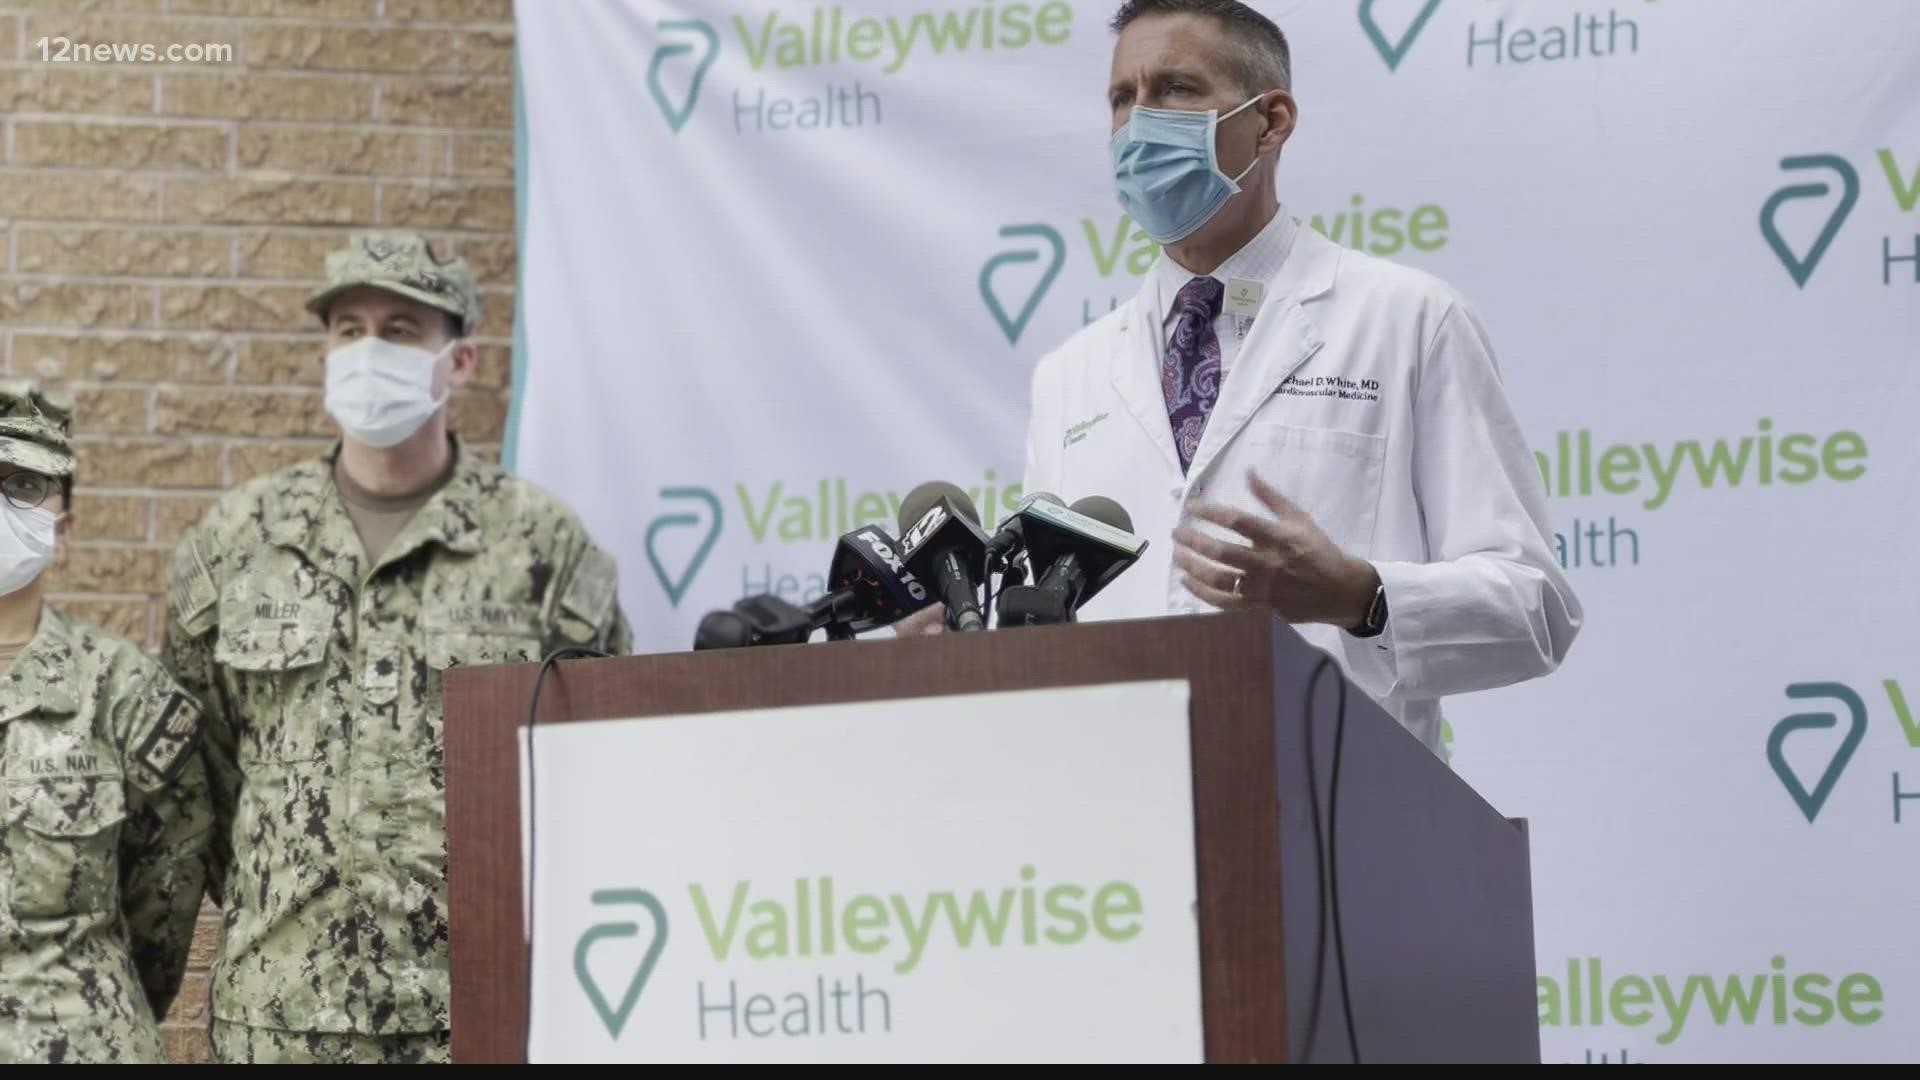 Valleywise Health is welcoming a 7-person U.S. Navy team to join Phoenix front-line healthcare workers led by Commander Russell Miller through next month.